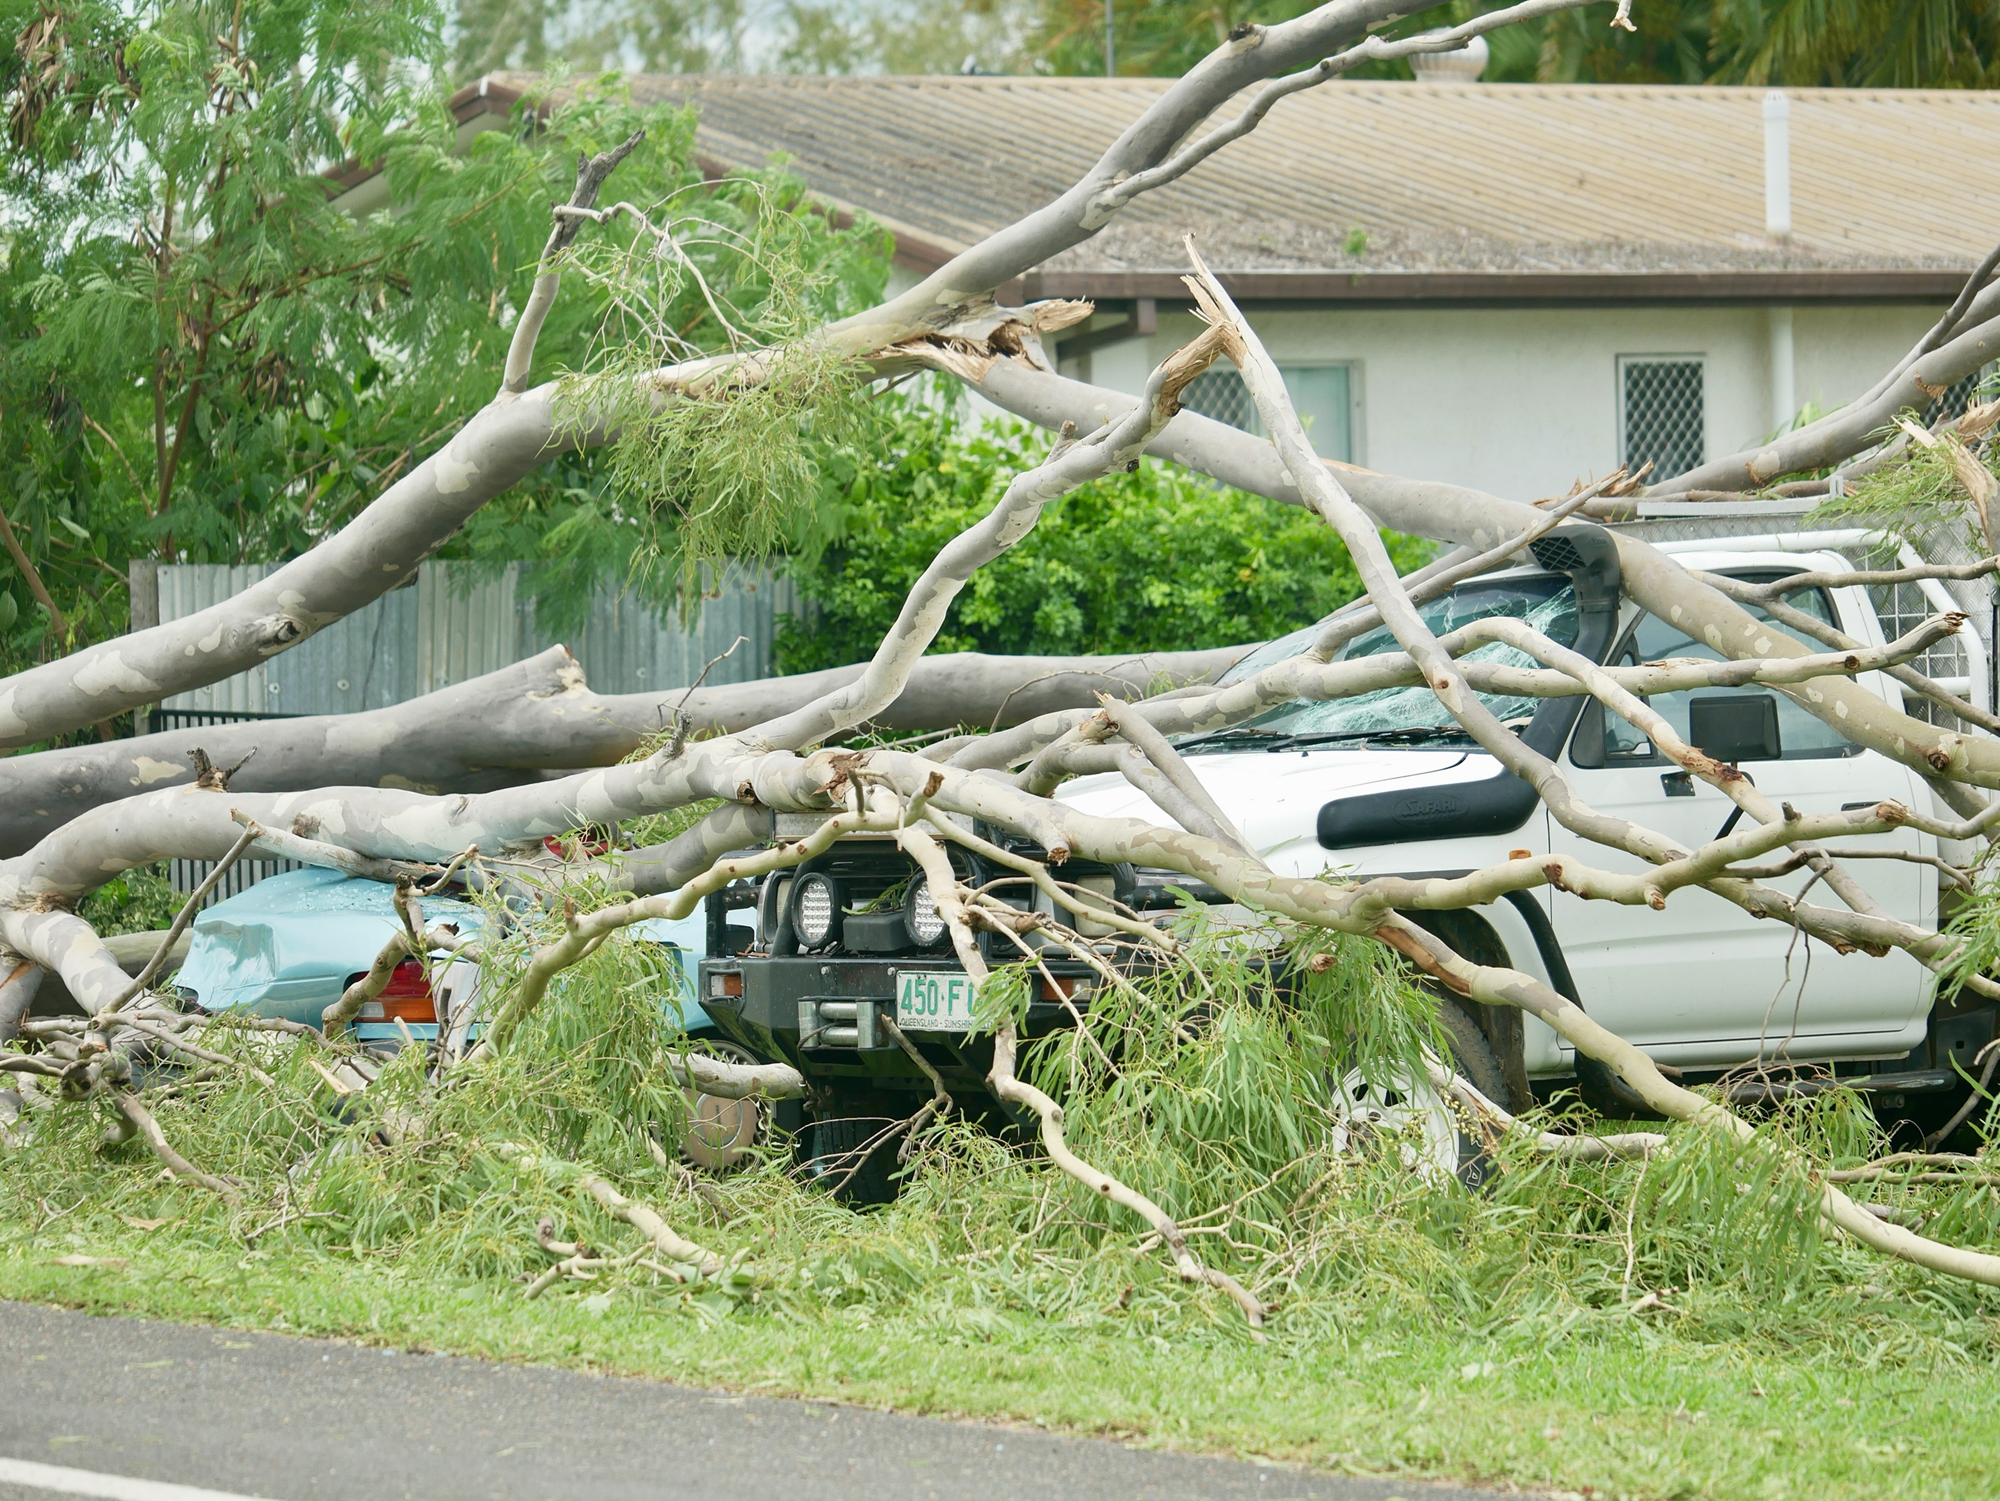 a felled tree and power line crushing two vehicles